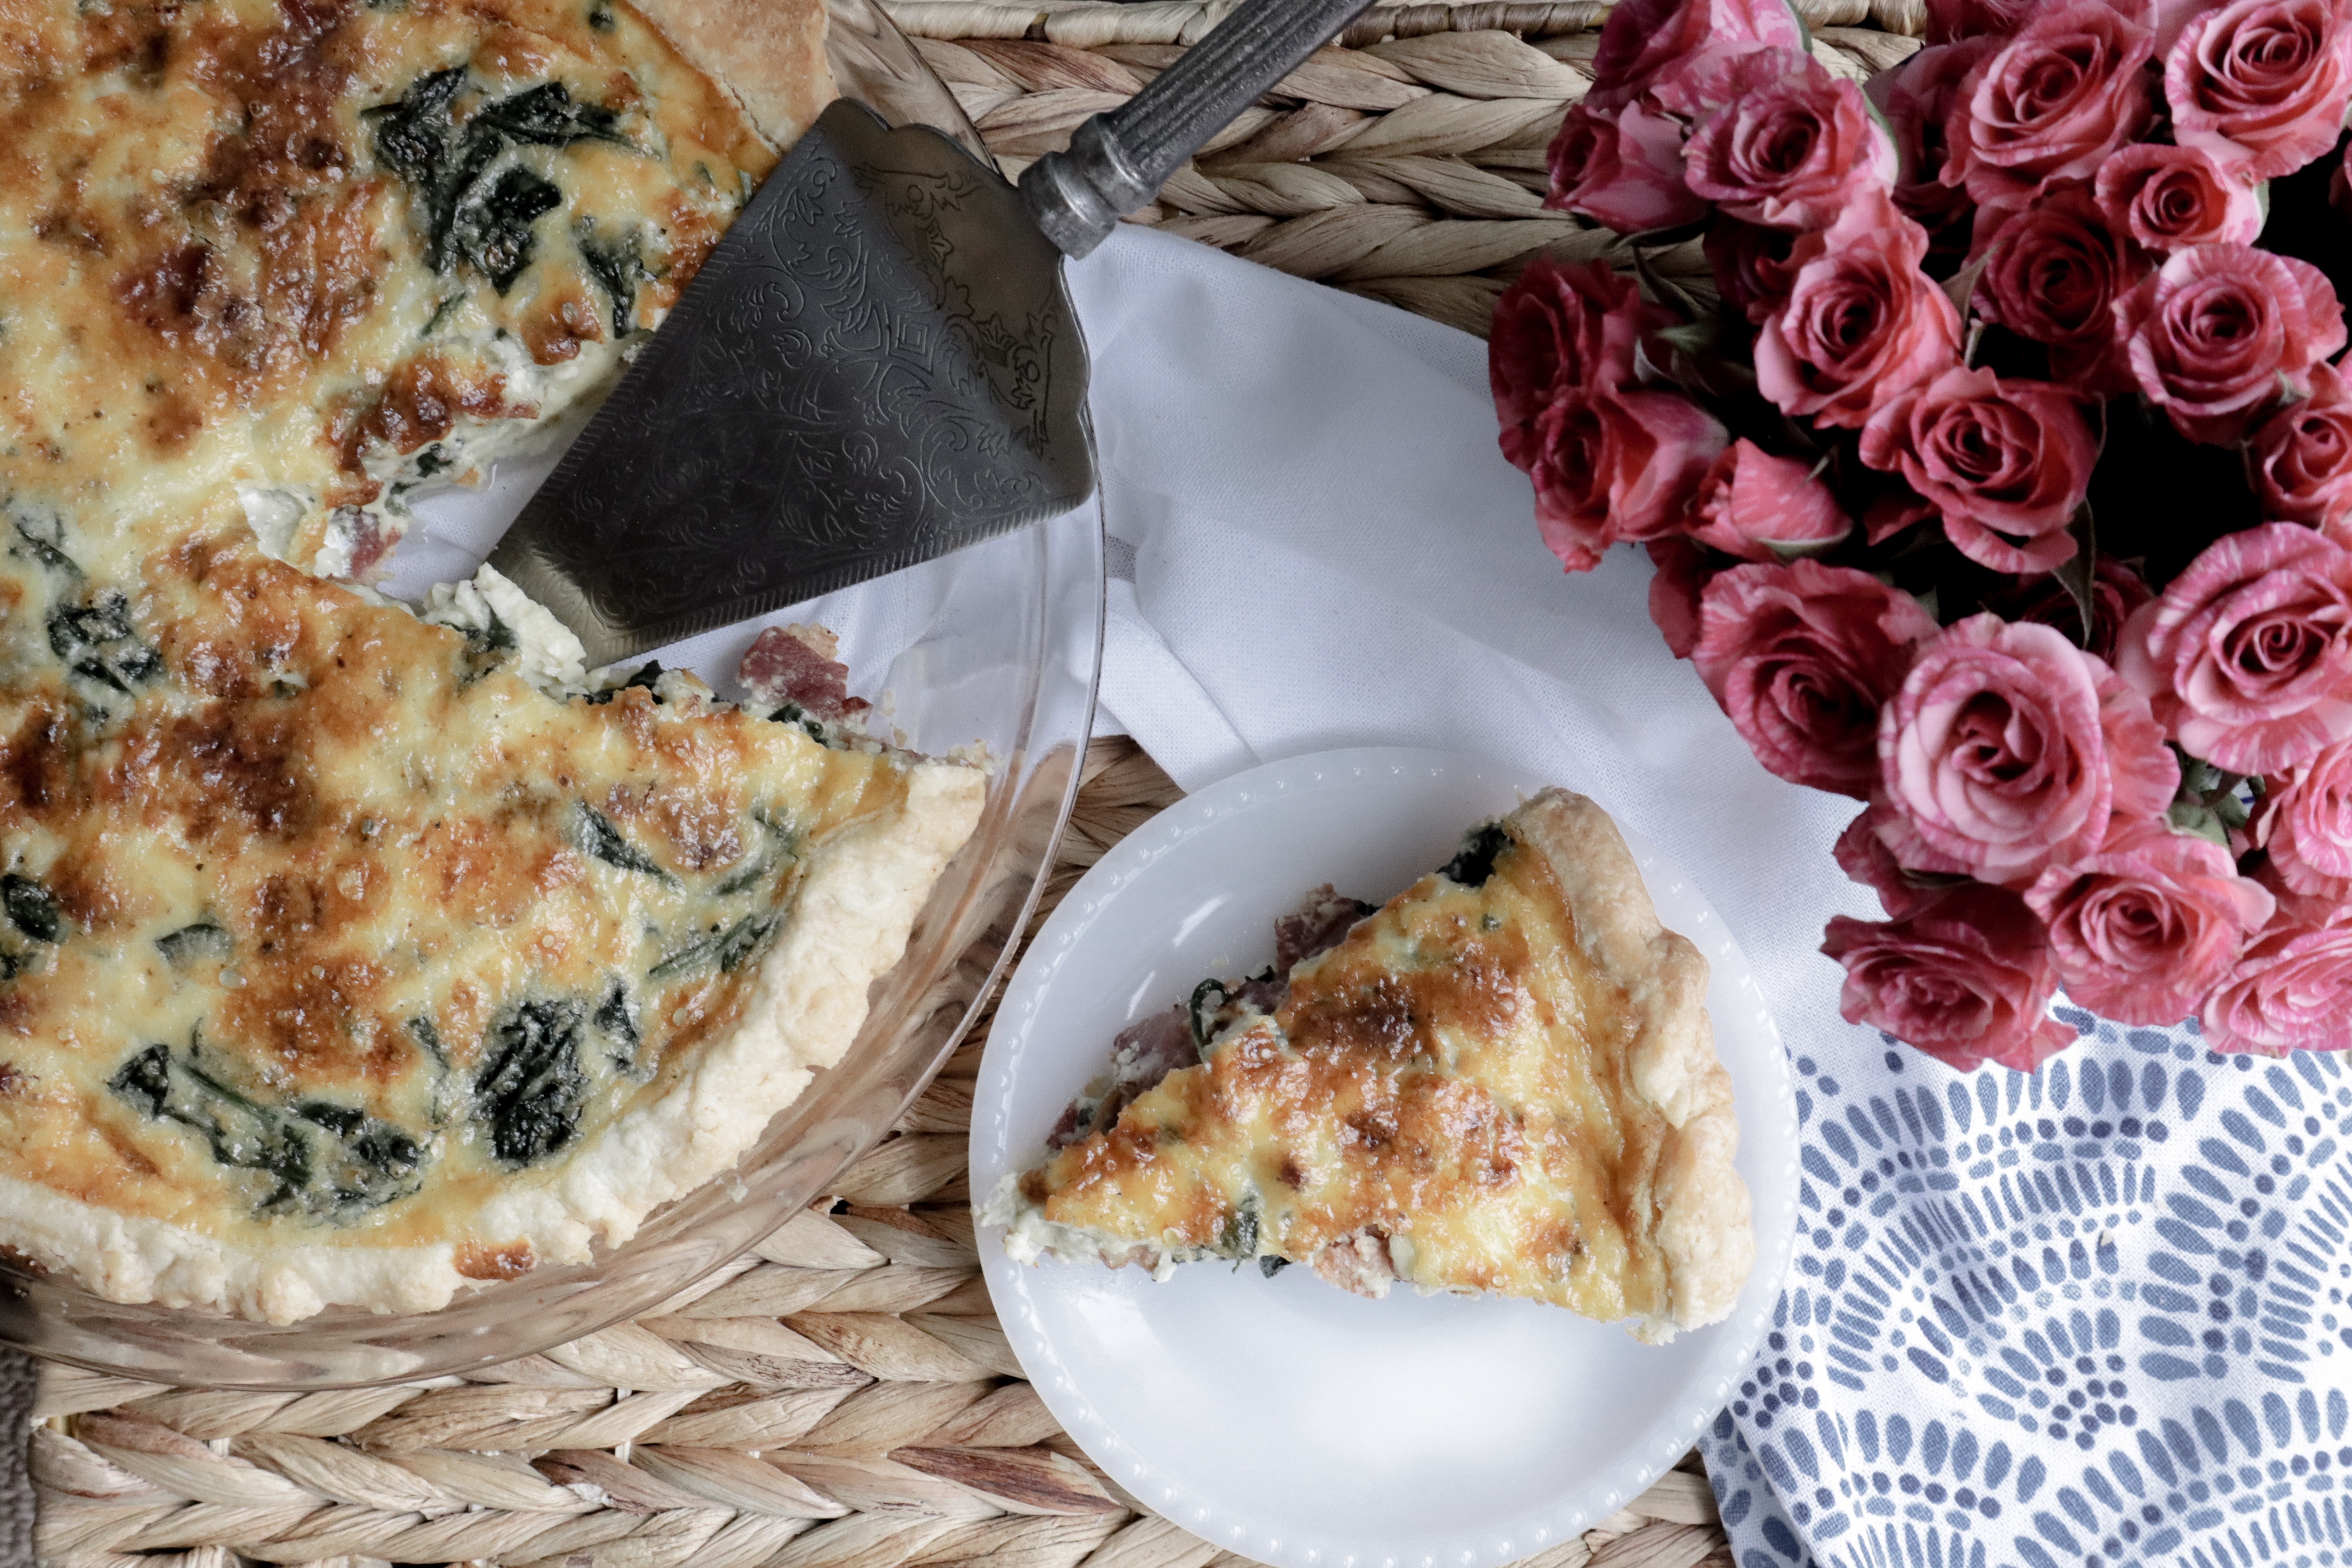 Spring Planting and Mud Season with Oakhurst Milk + Spinach, Bacon & Blue Cheese Quiche Recipe